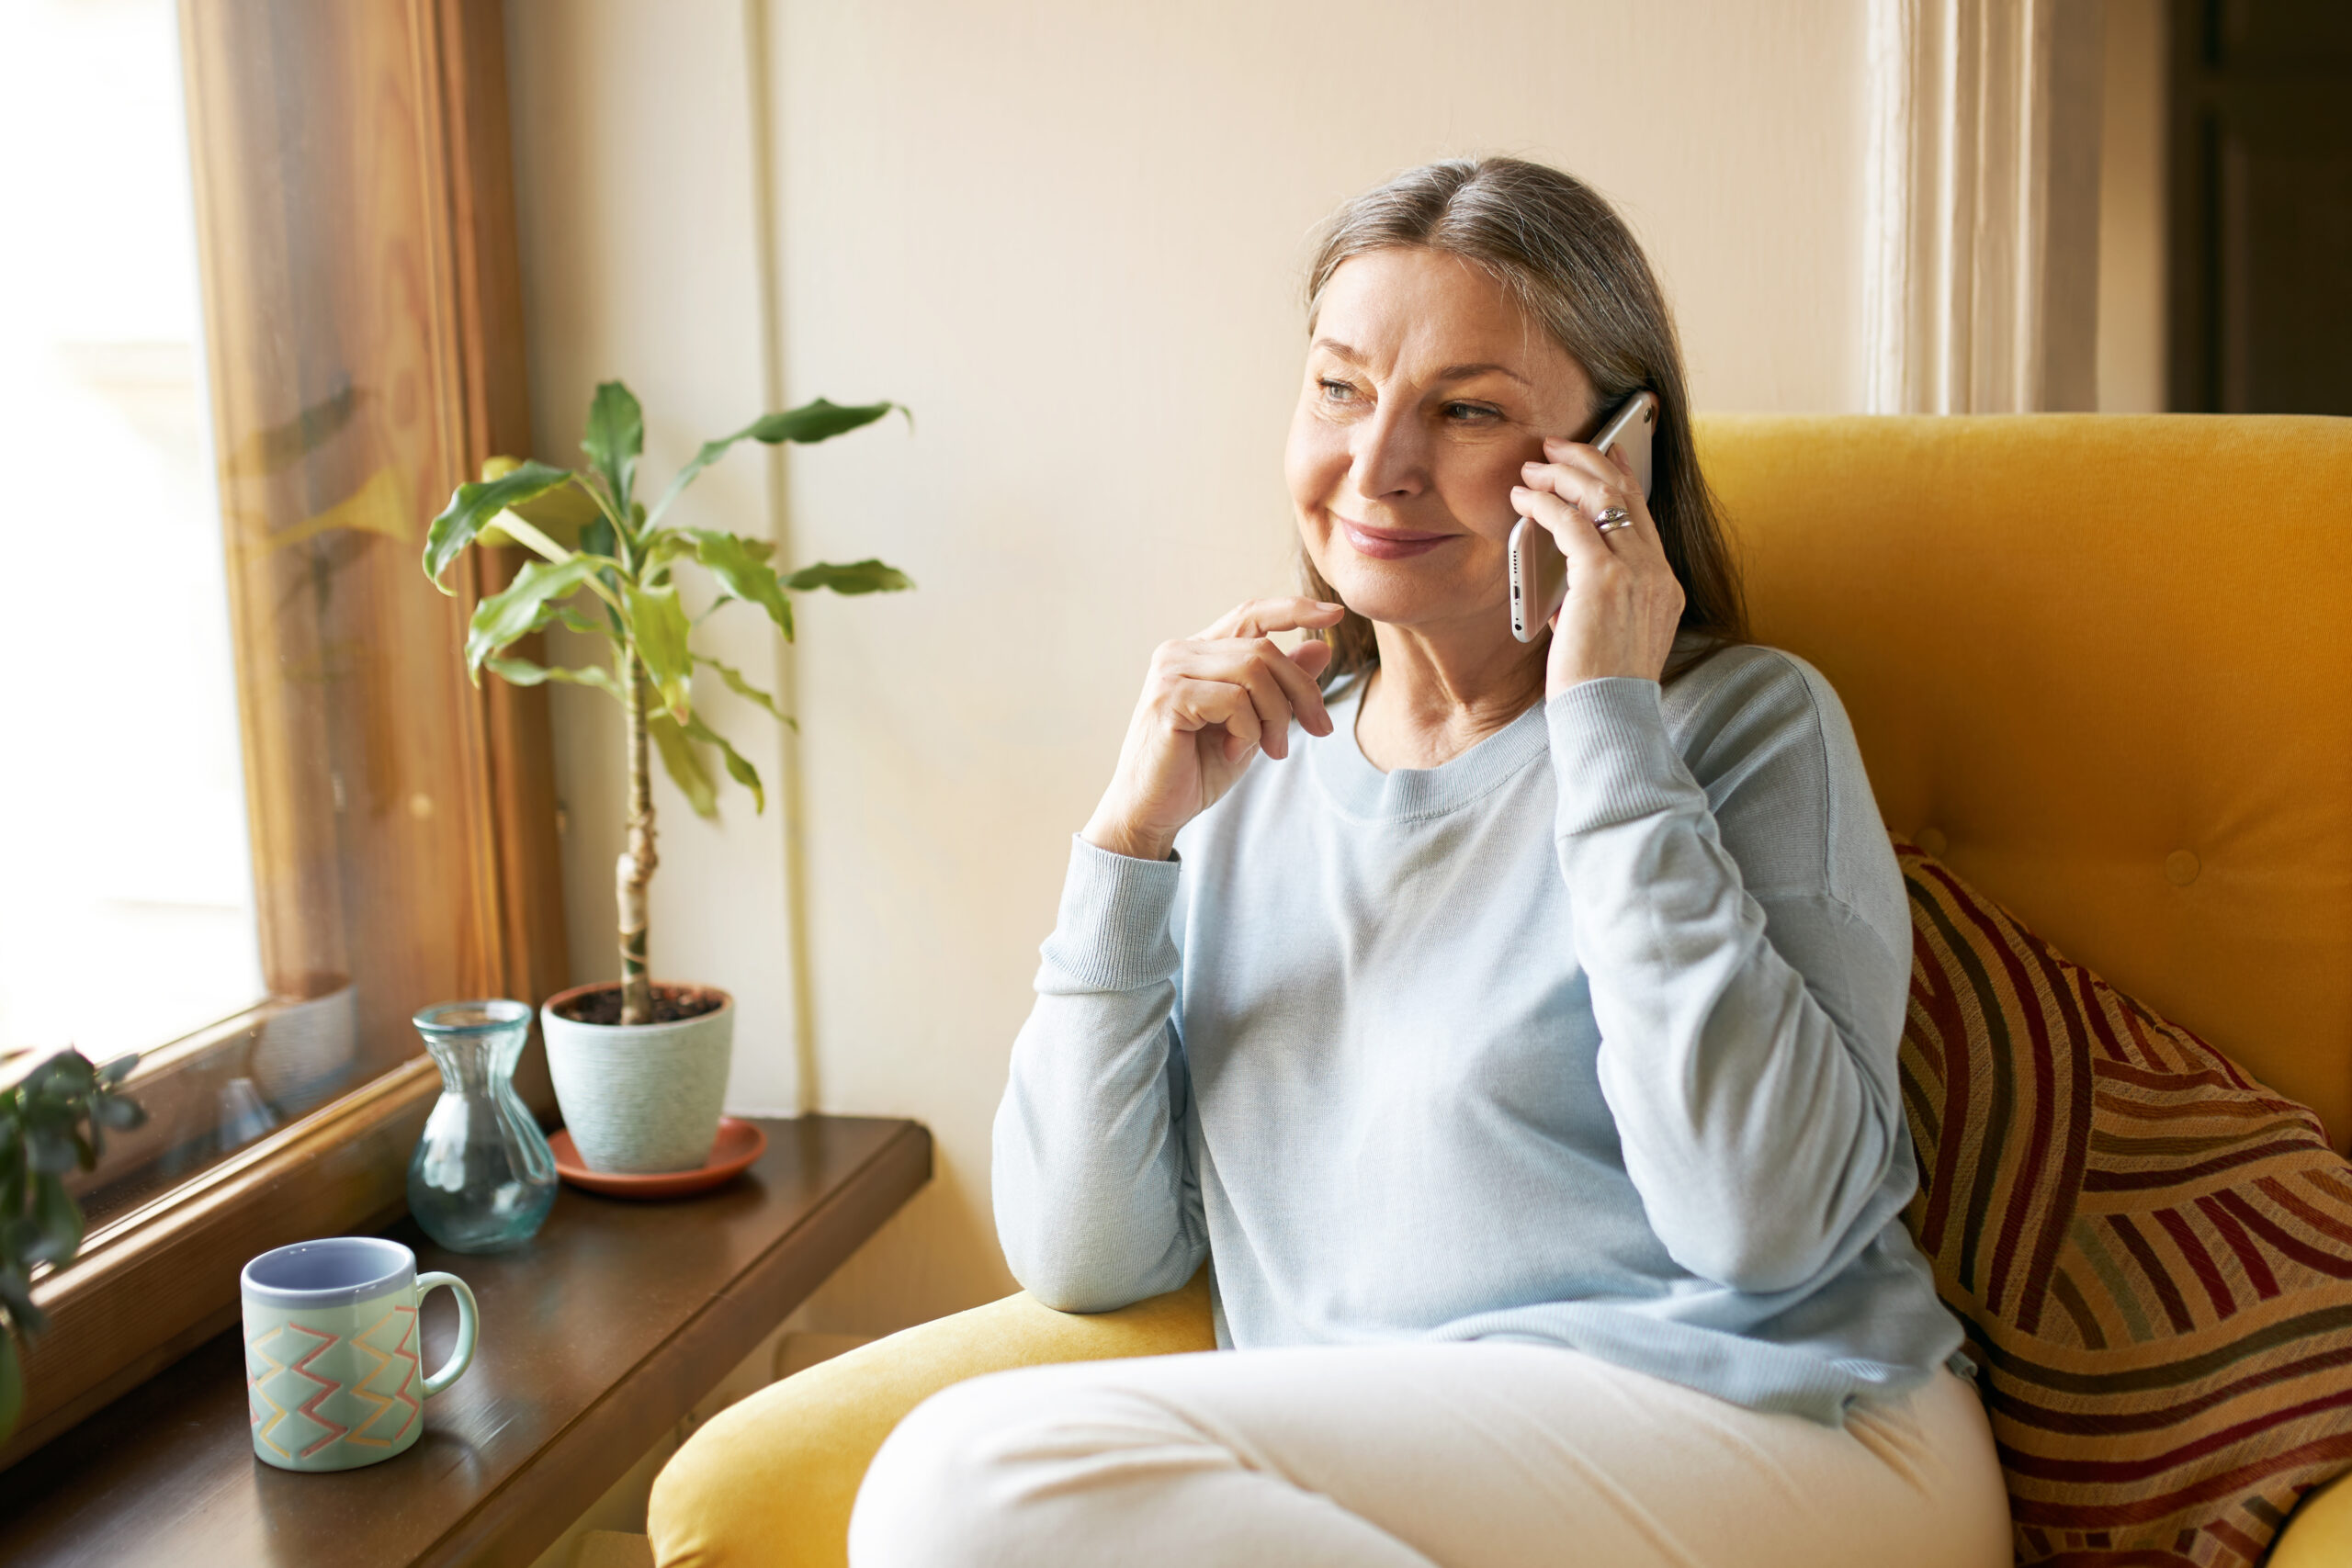 Why, when and how to contact My Aged Care